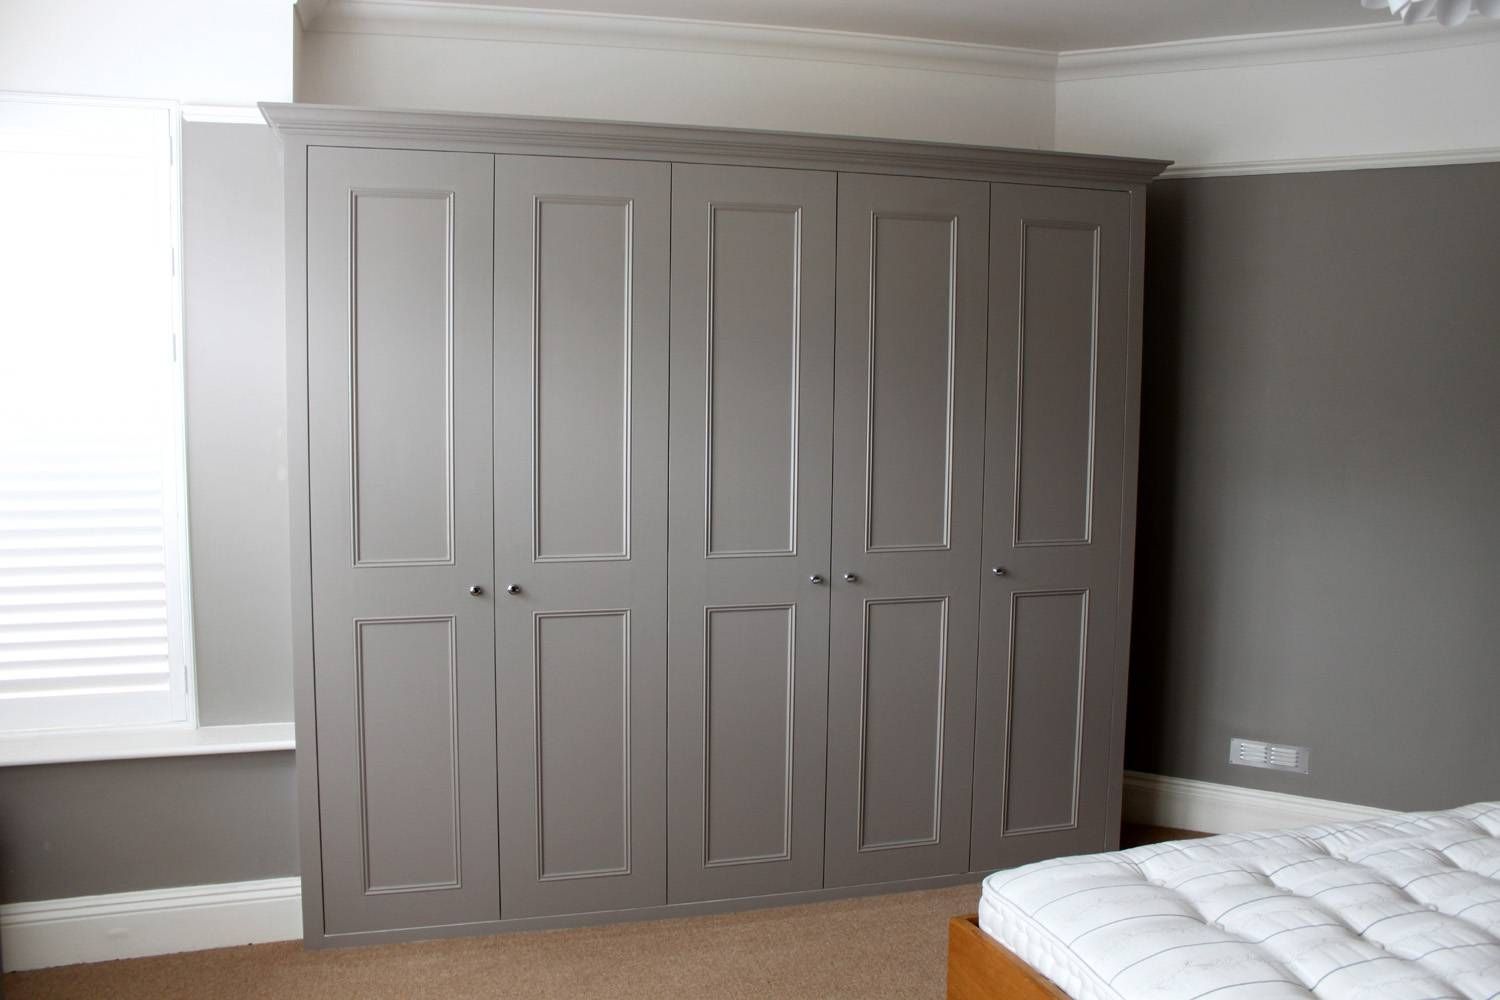 16 Best Fitted Wardrobes Images On Pinterest | Bedroom Wardrobe Pertaining To Fitted Wooden Wardrobes (View 2 of 30)